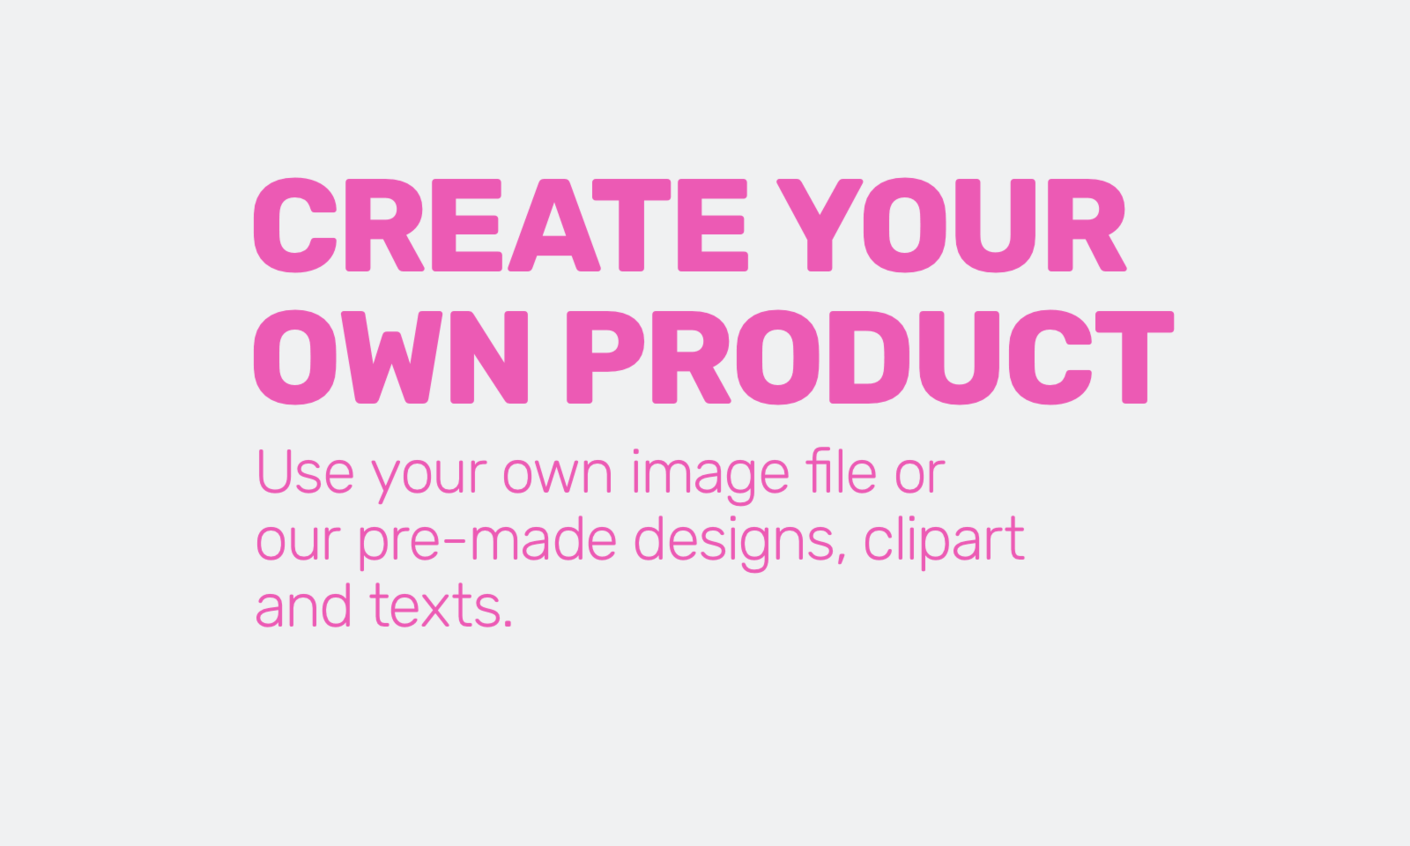 Create your own product